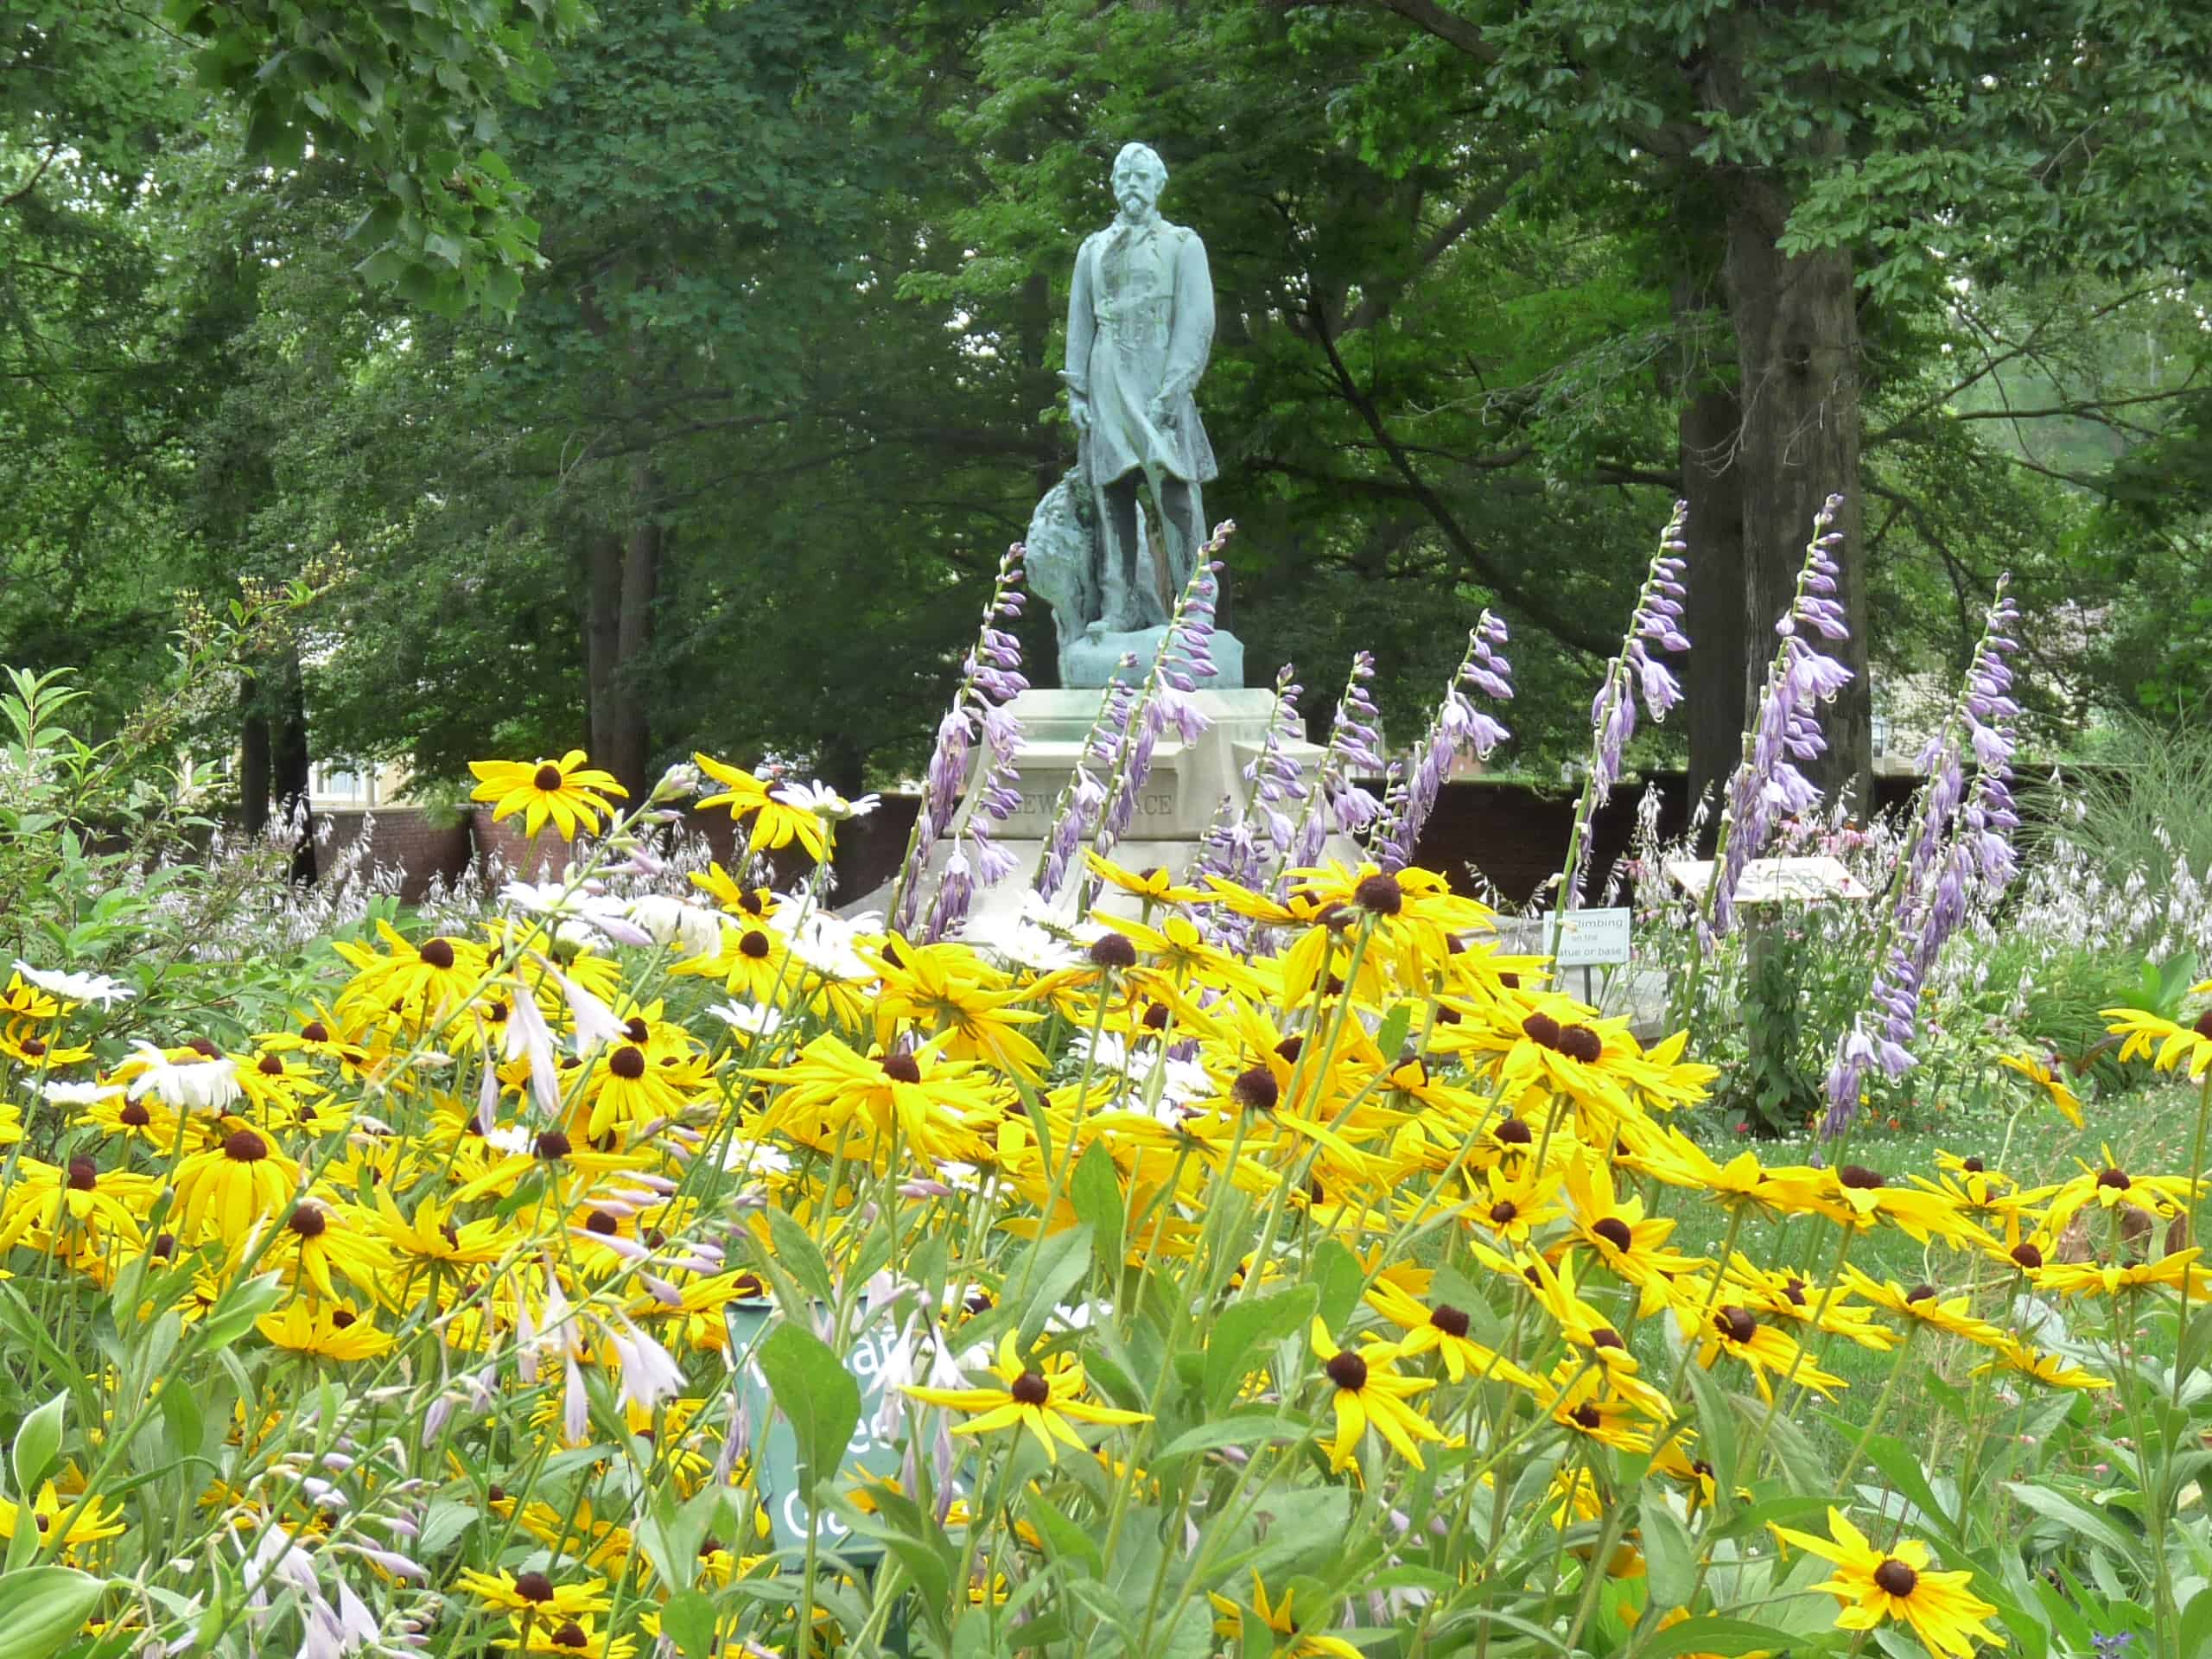 A statue in bronze of Lew Wallace with yellow flowers in front of it